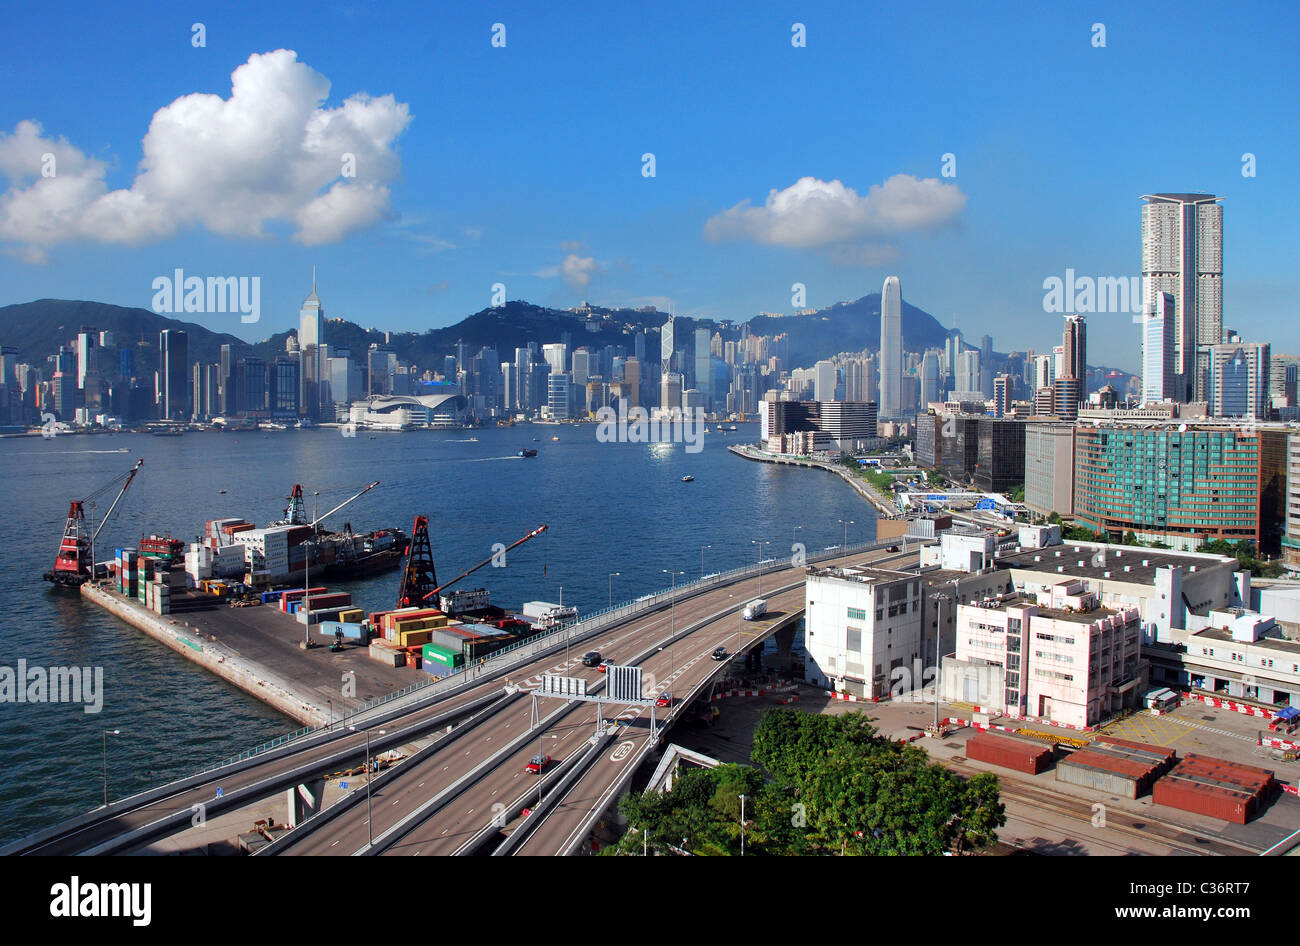 Wide angle view of Hong Kong Island taken from Kowloon with container terminal and expressway in the foreground Stock Photo